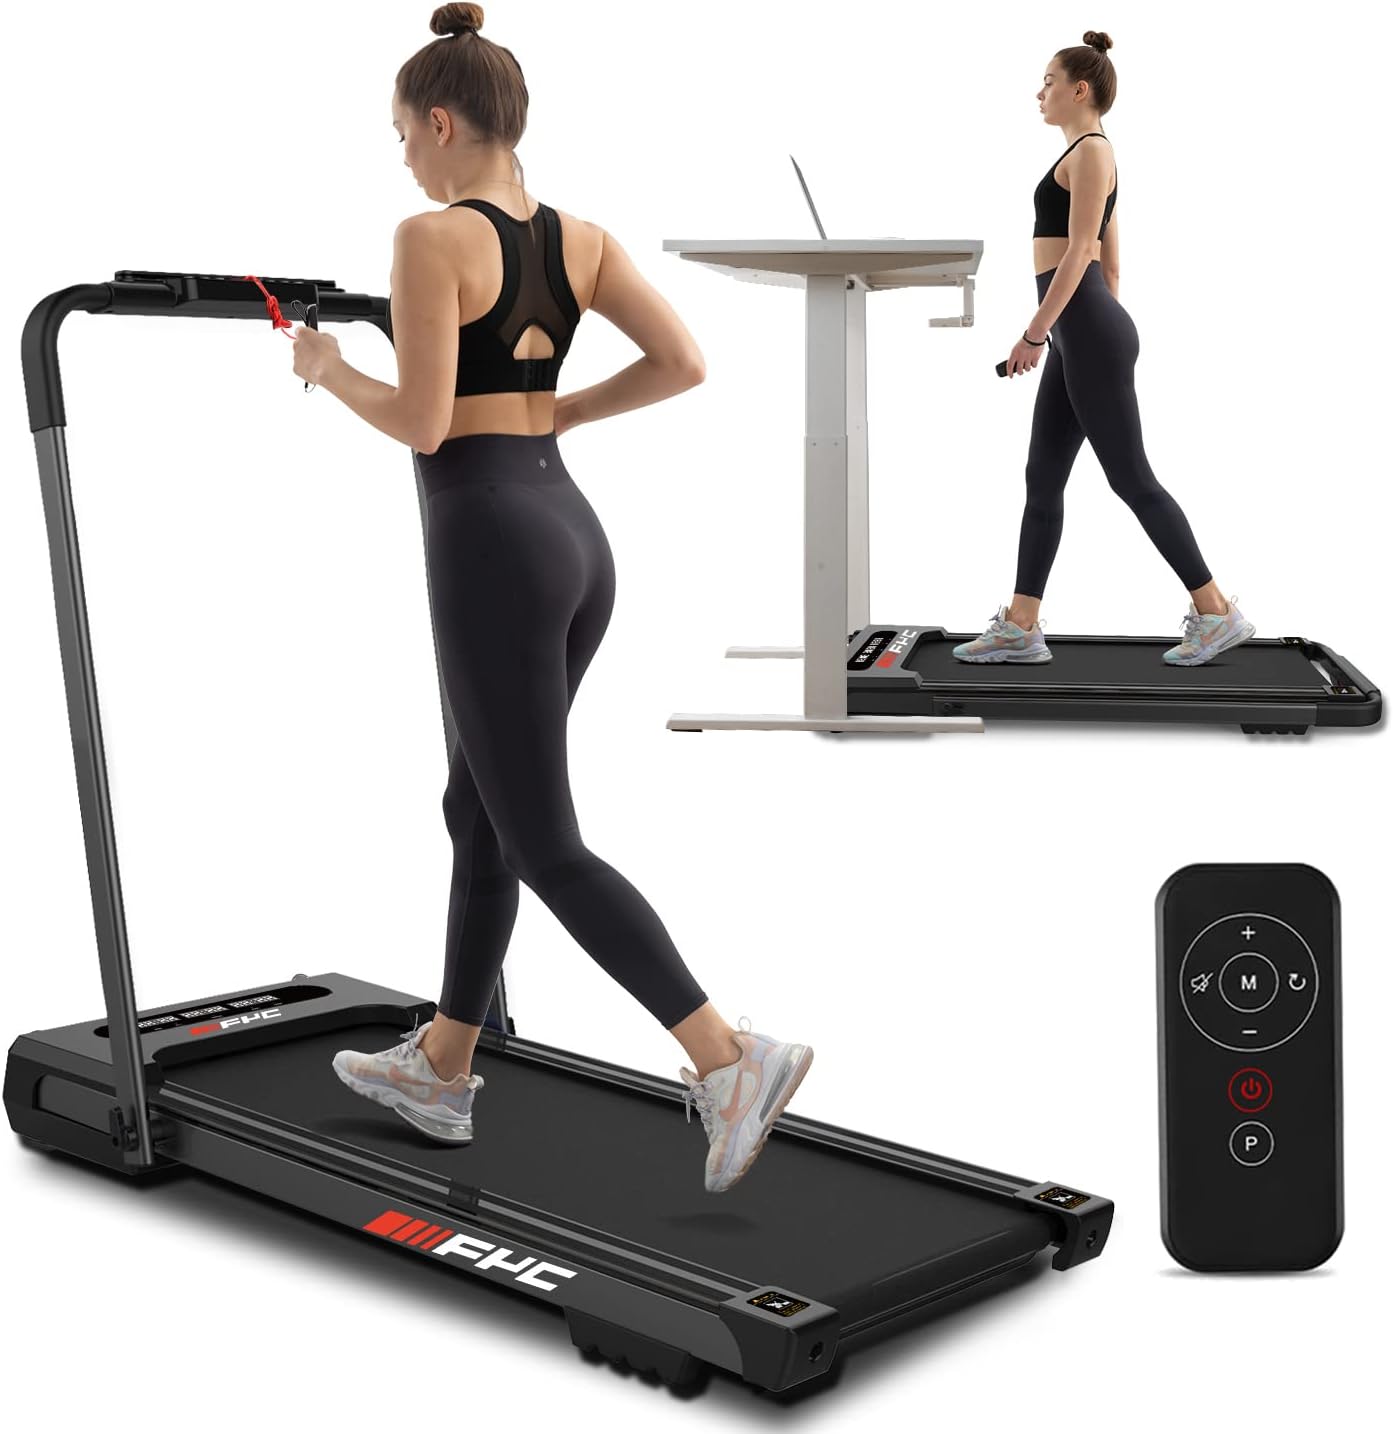 FYC Under Desk Treadmill - 2 in 1 Folding Treadmill Desk Workstation for Home 3.5HP 300LBS Weight Capacity, Free Installation Foldable Treadmill Compact Electric Running Machine for Office